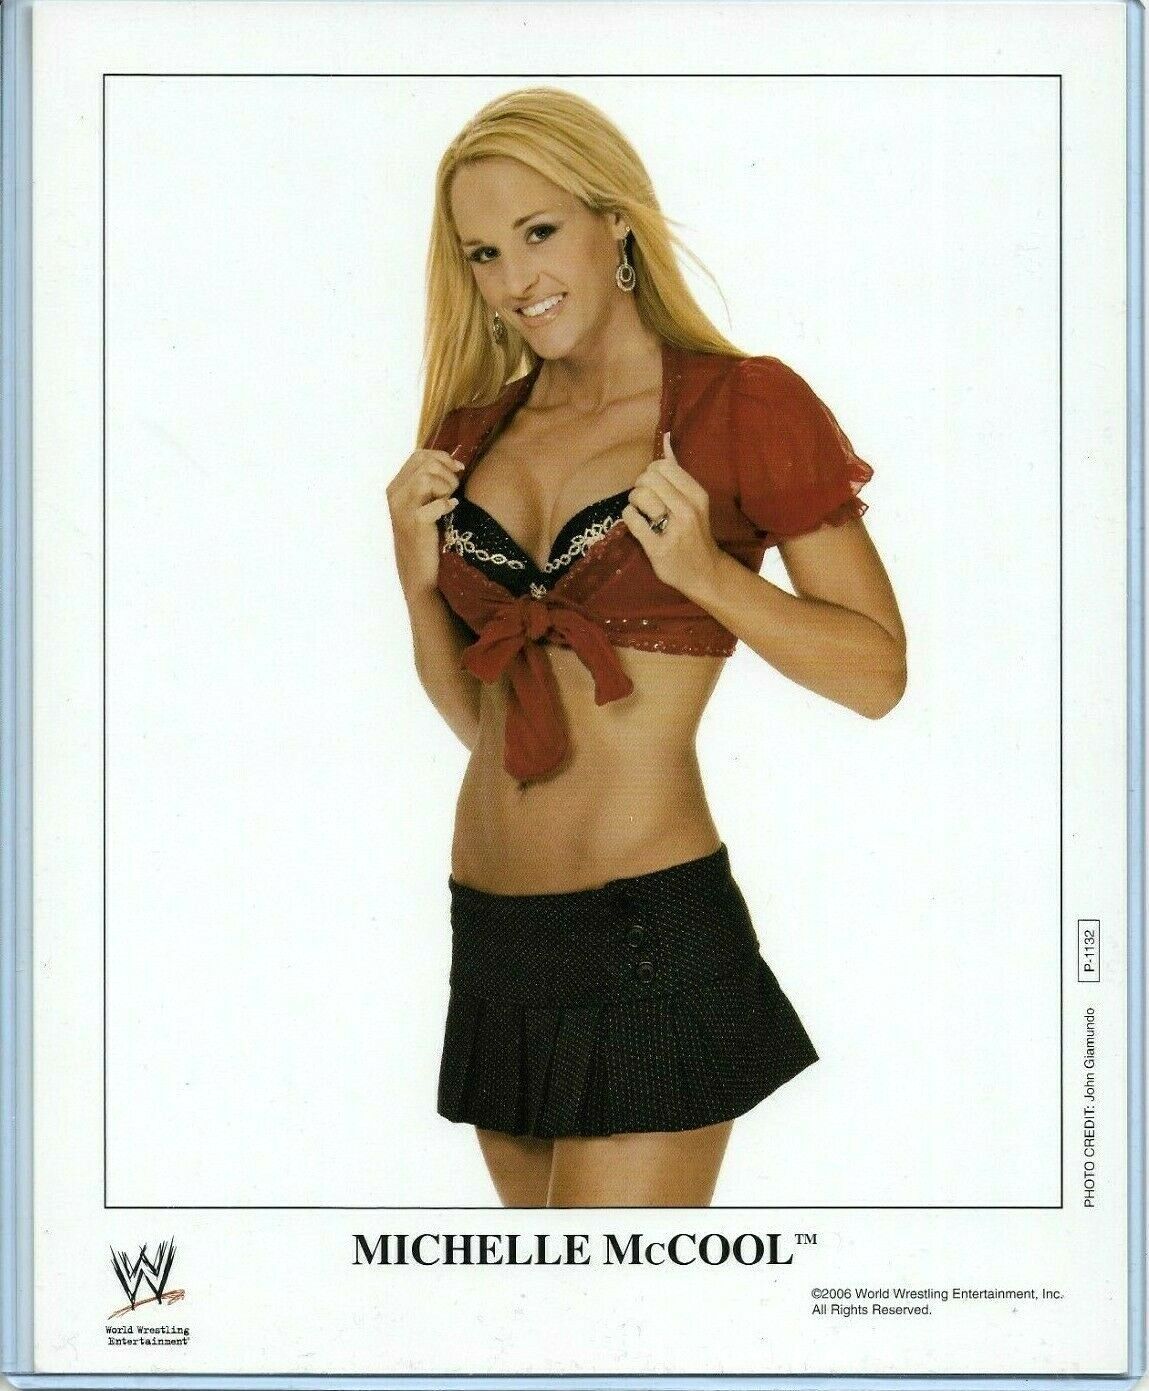 WWE MICHELLE MCCOOL P-1132 OFFICIAL LICENSED ORIGINAL 8X10 PROMO Photo Poster painting RARE